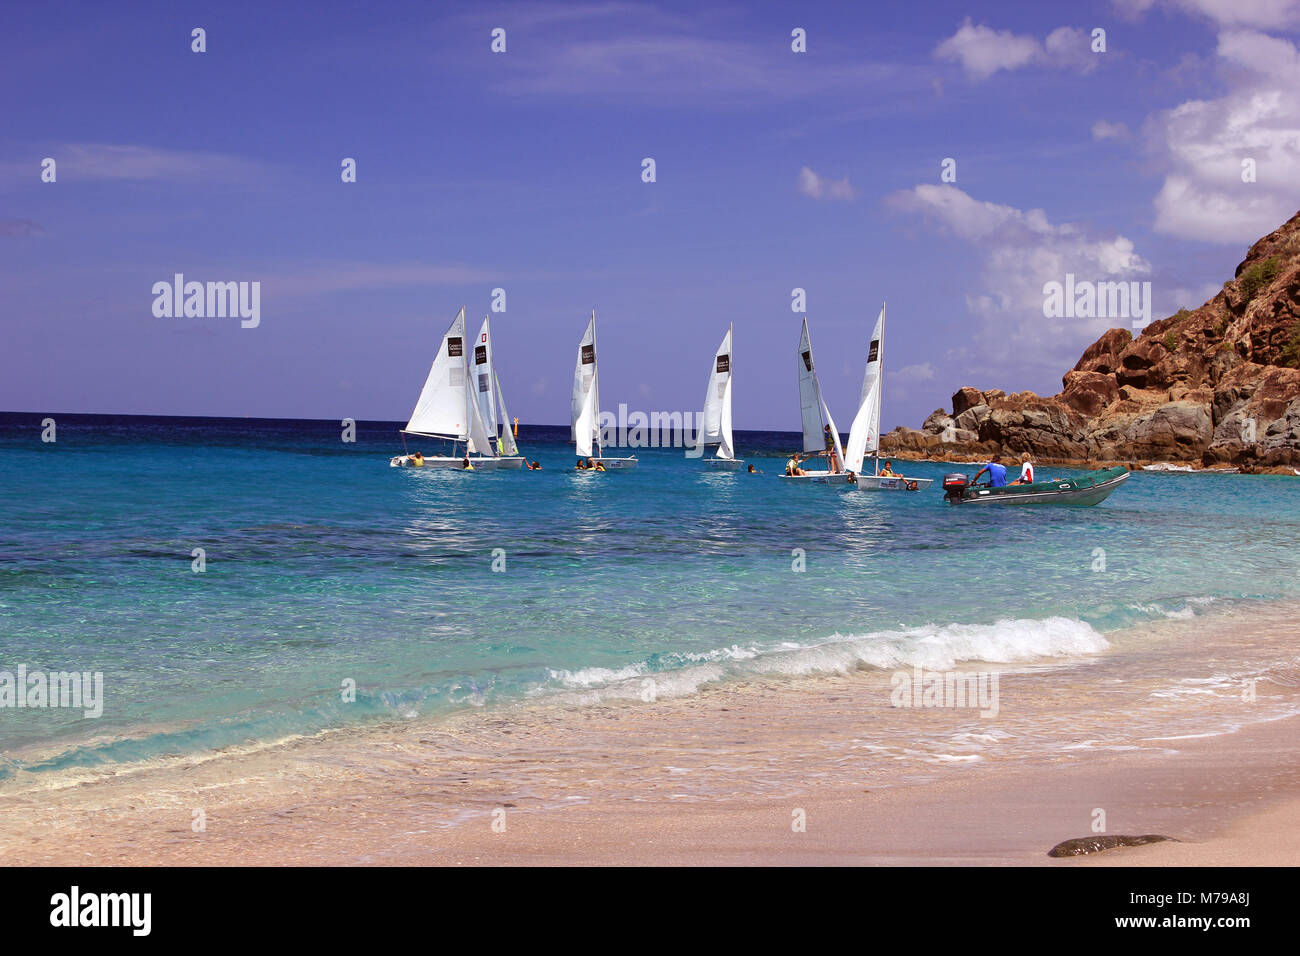 St. Barts in the West Indies Stock Photo